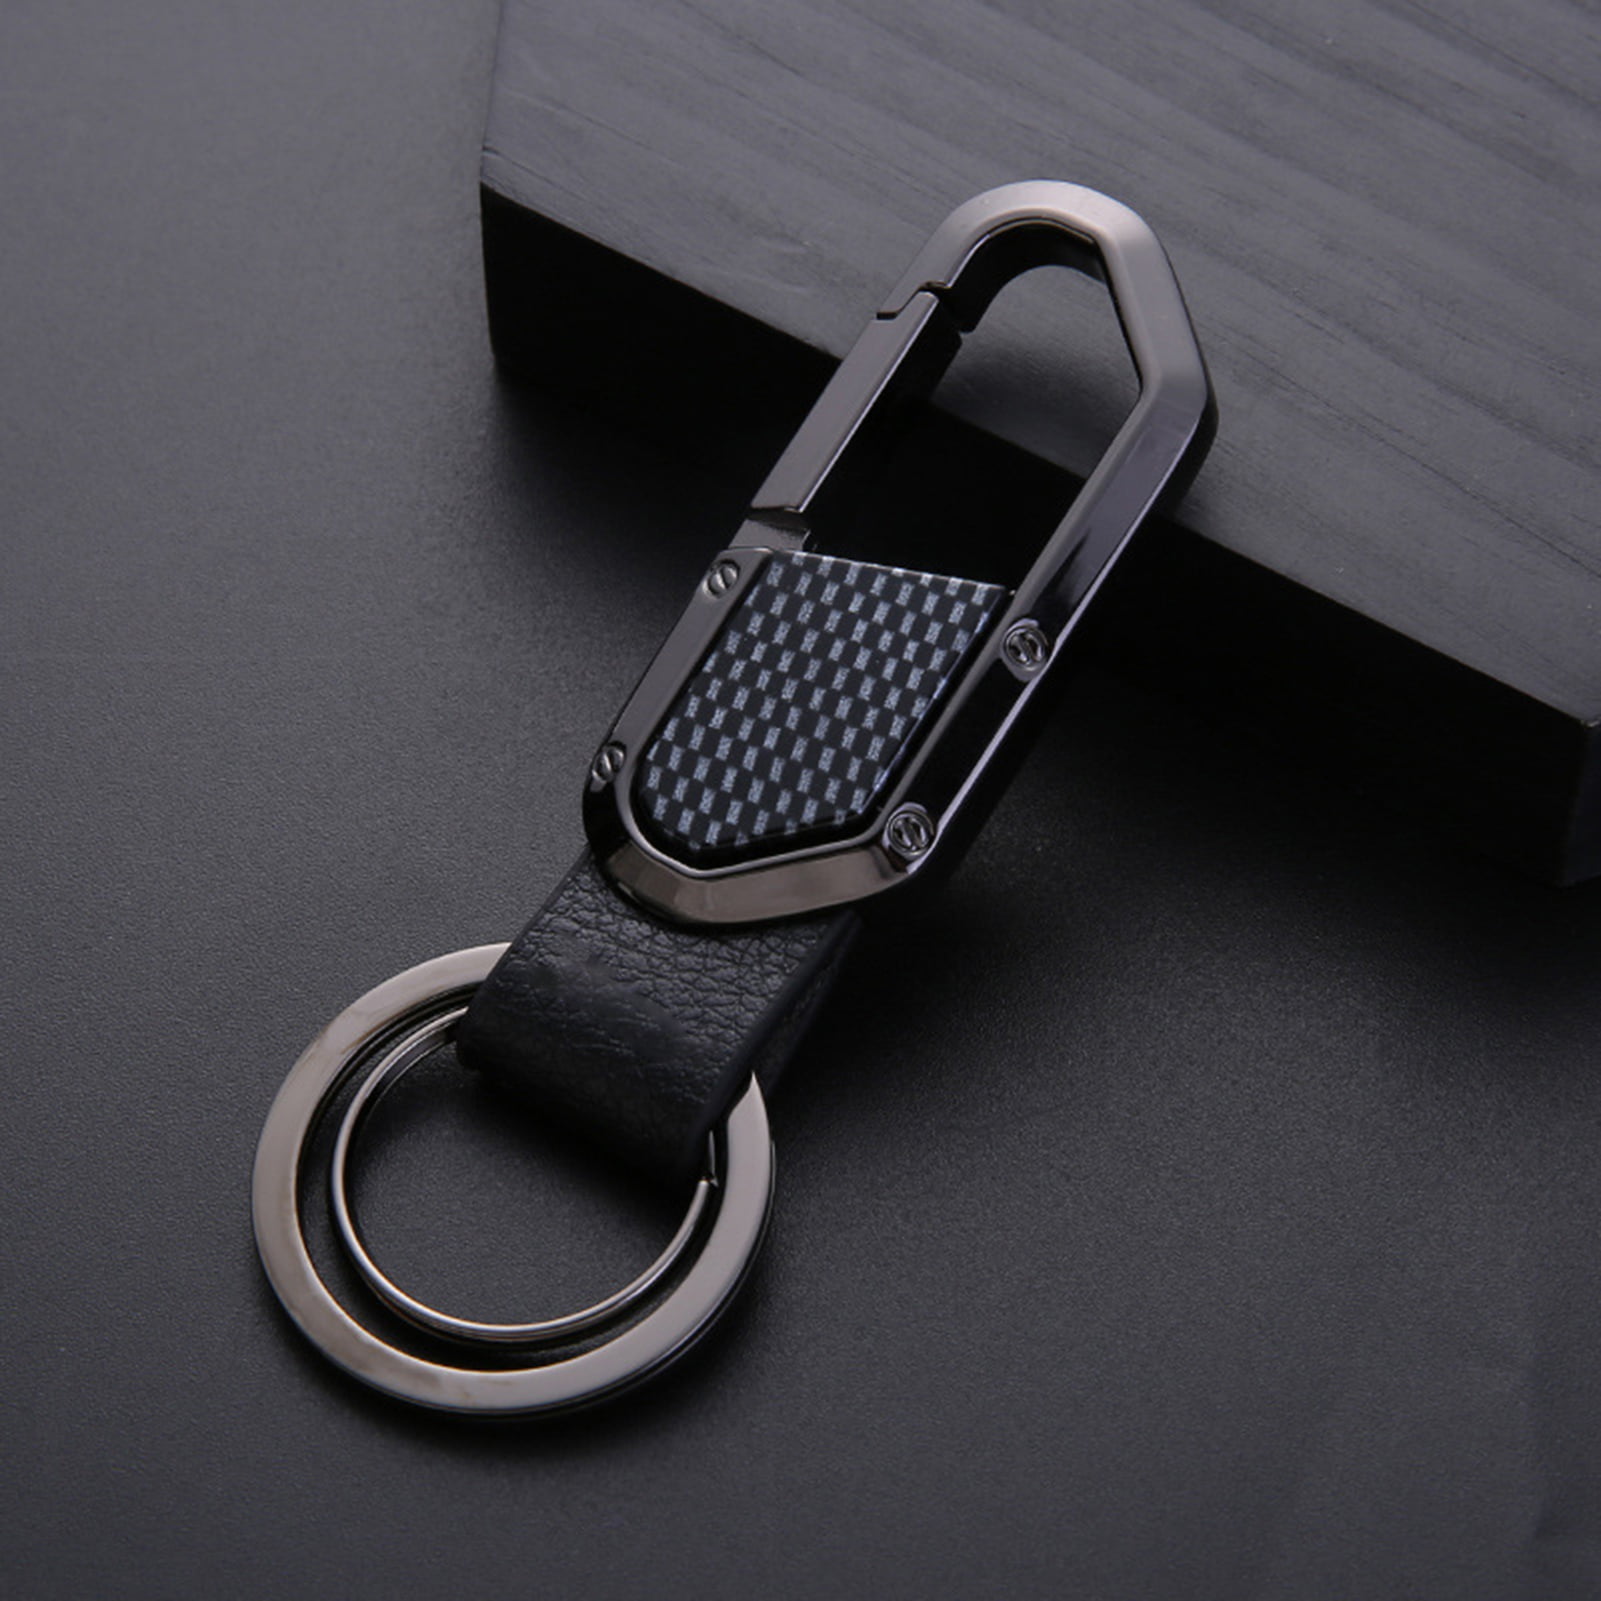 Augoing Keychain,Key Ring Clip for Men,Universal Key Chain Hook with Quick  Release,Heavy Duty Key Chain for Car Keys,Carabiner without Spring Inside.